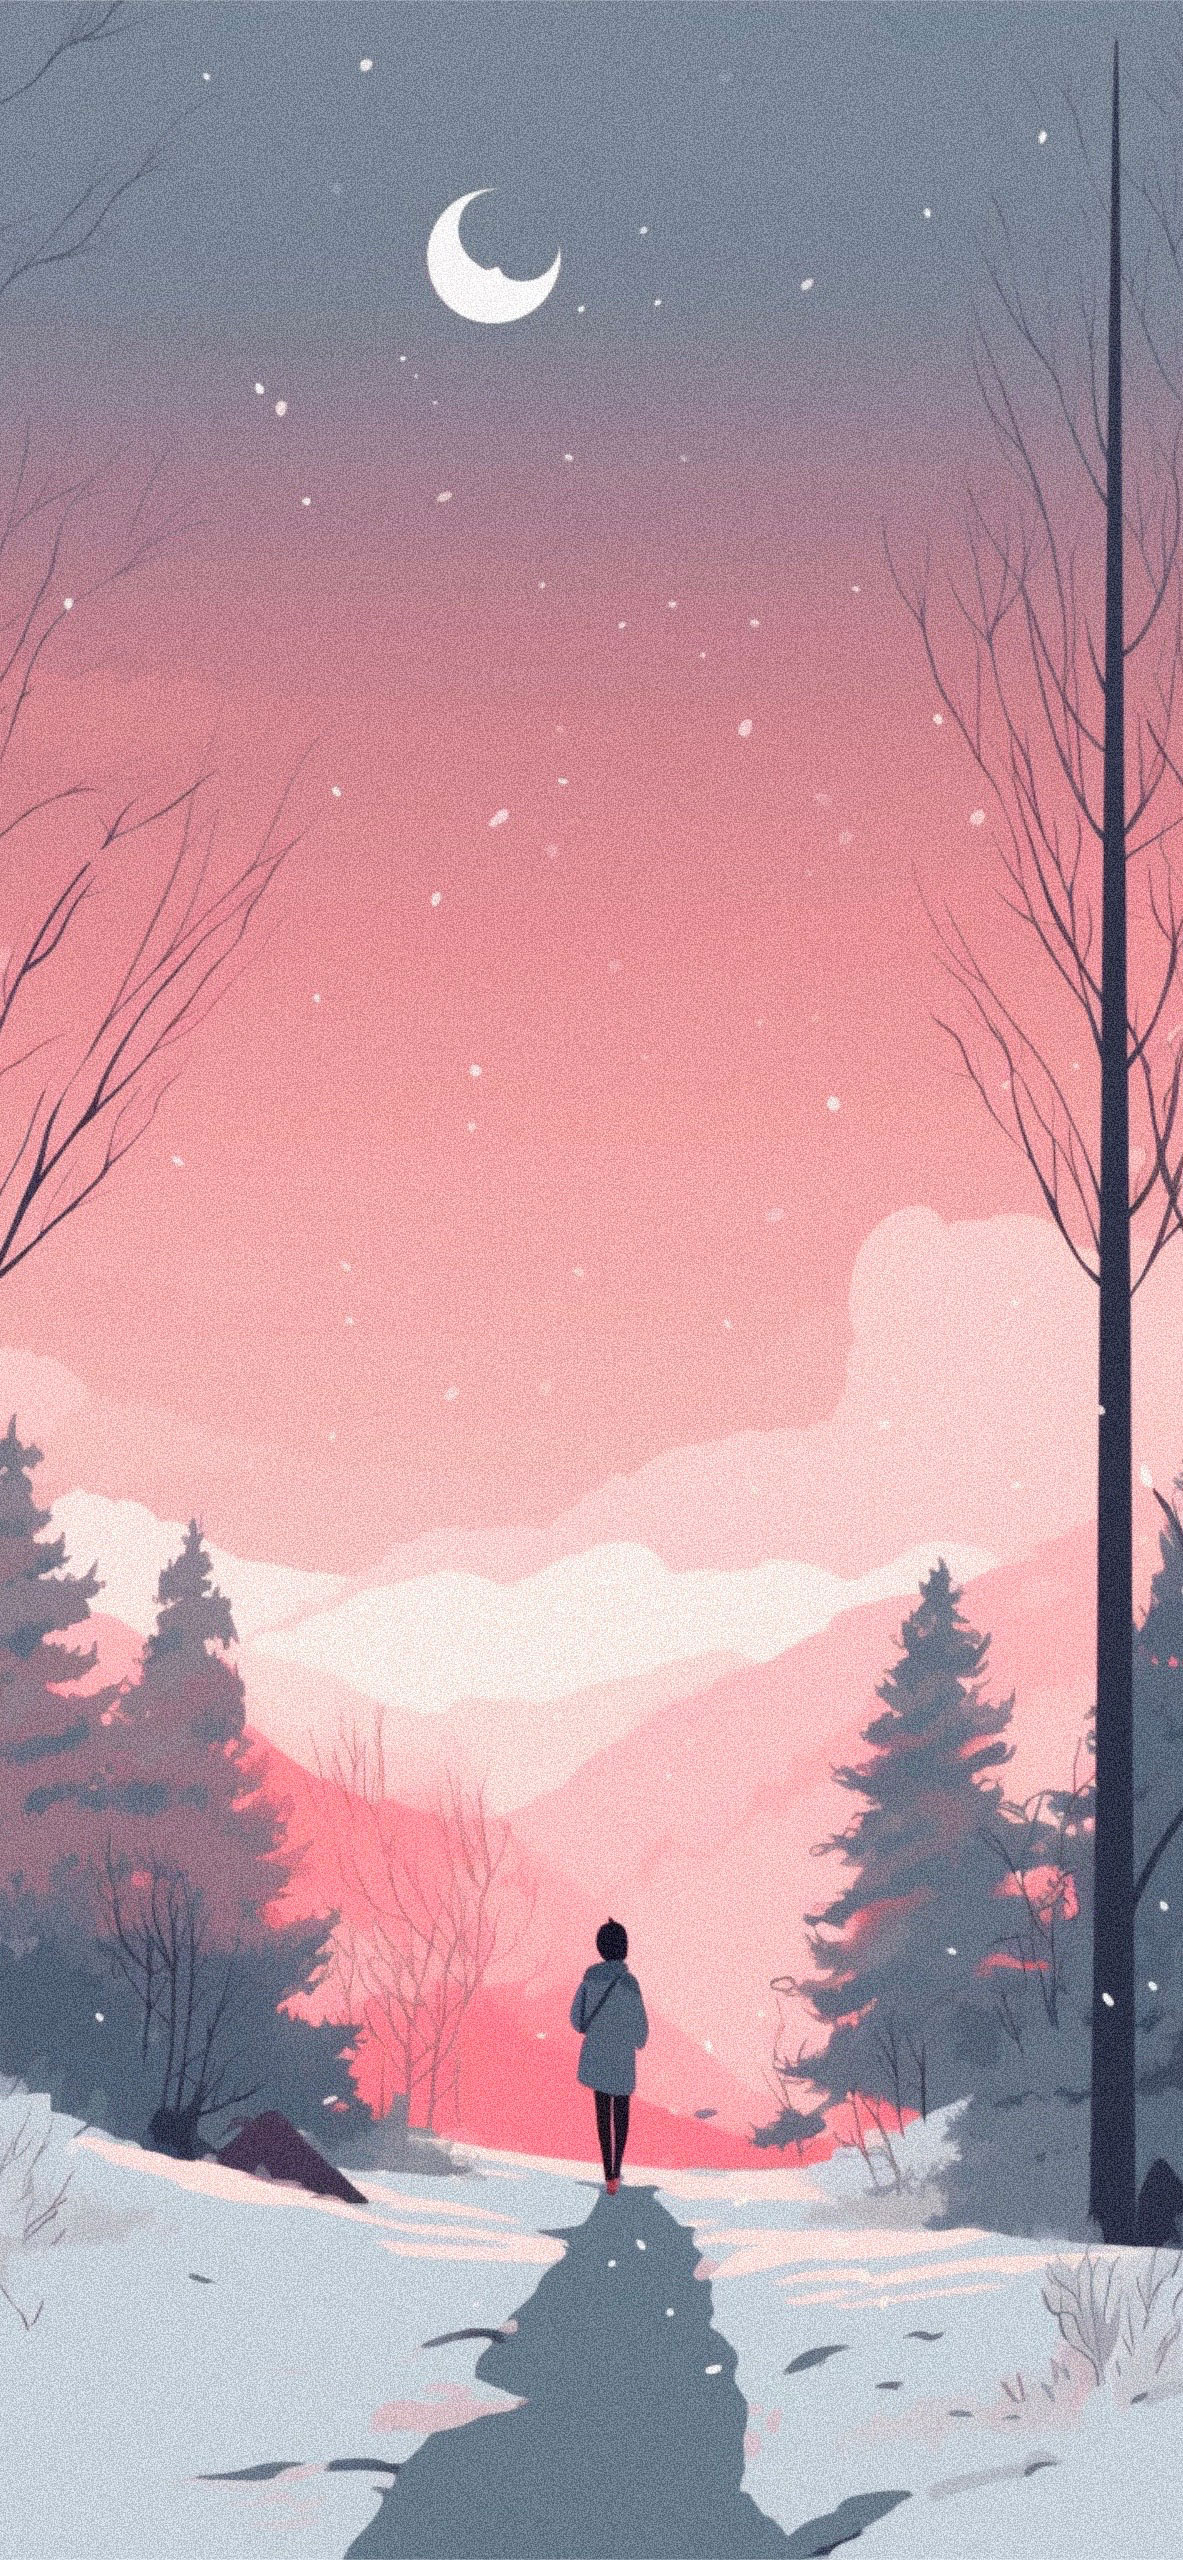 41 Winter Aesthetic Wallpapers for a Frosty Magical Phone Screen  The  Mood Guide